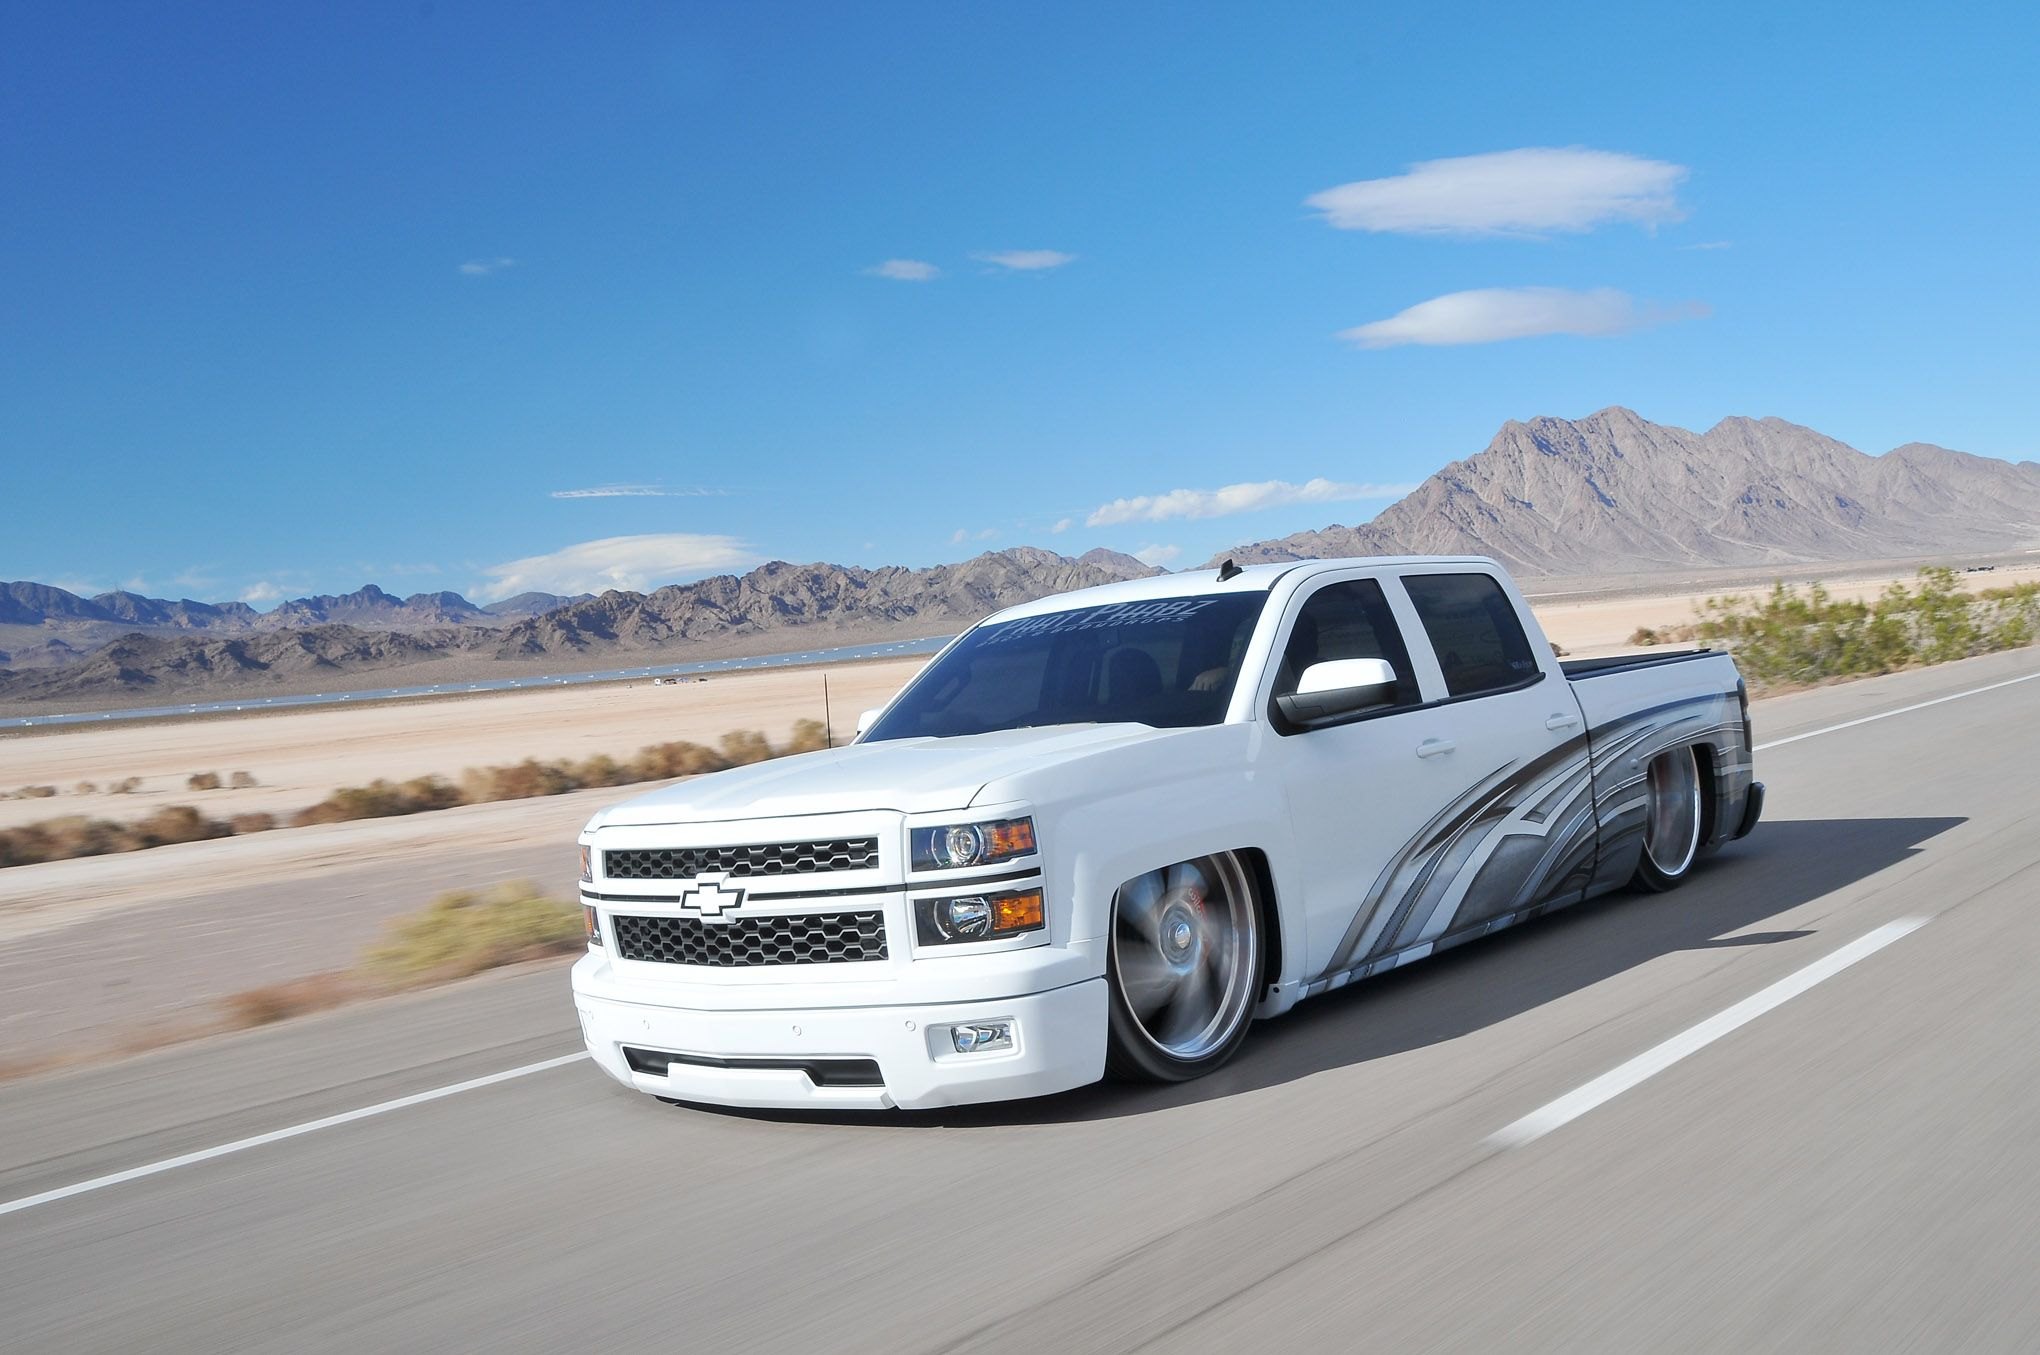 Aftermarket Headlights on White Lowered Chevy Silverado - Photo by Phil Gordon